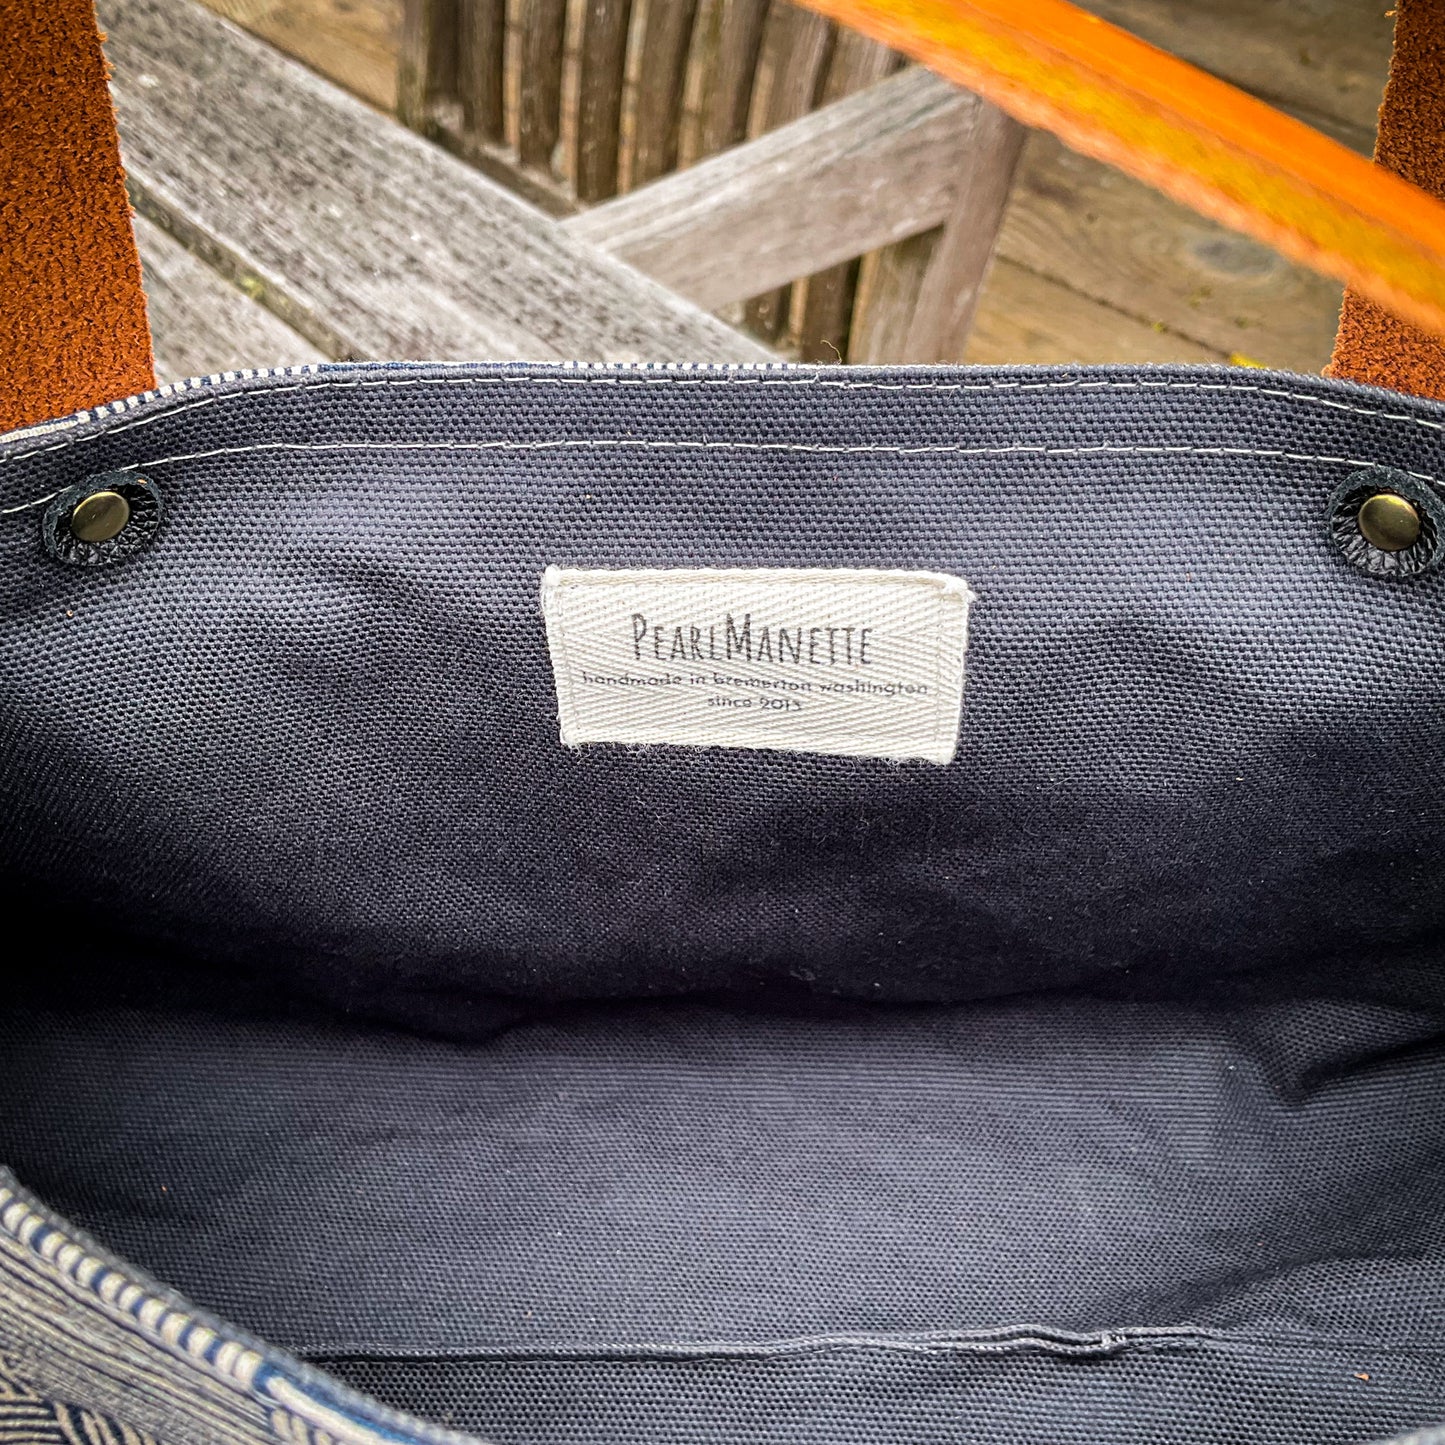 Gus Tool Bag - Rosa Floral - Navy Canvas/Olive Waxed Canvas